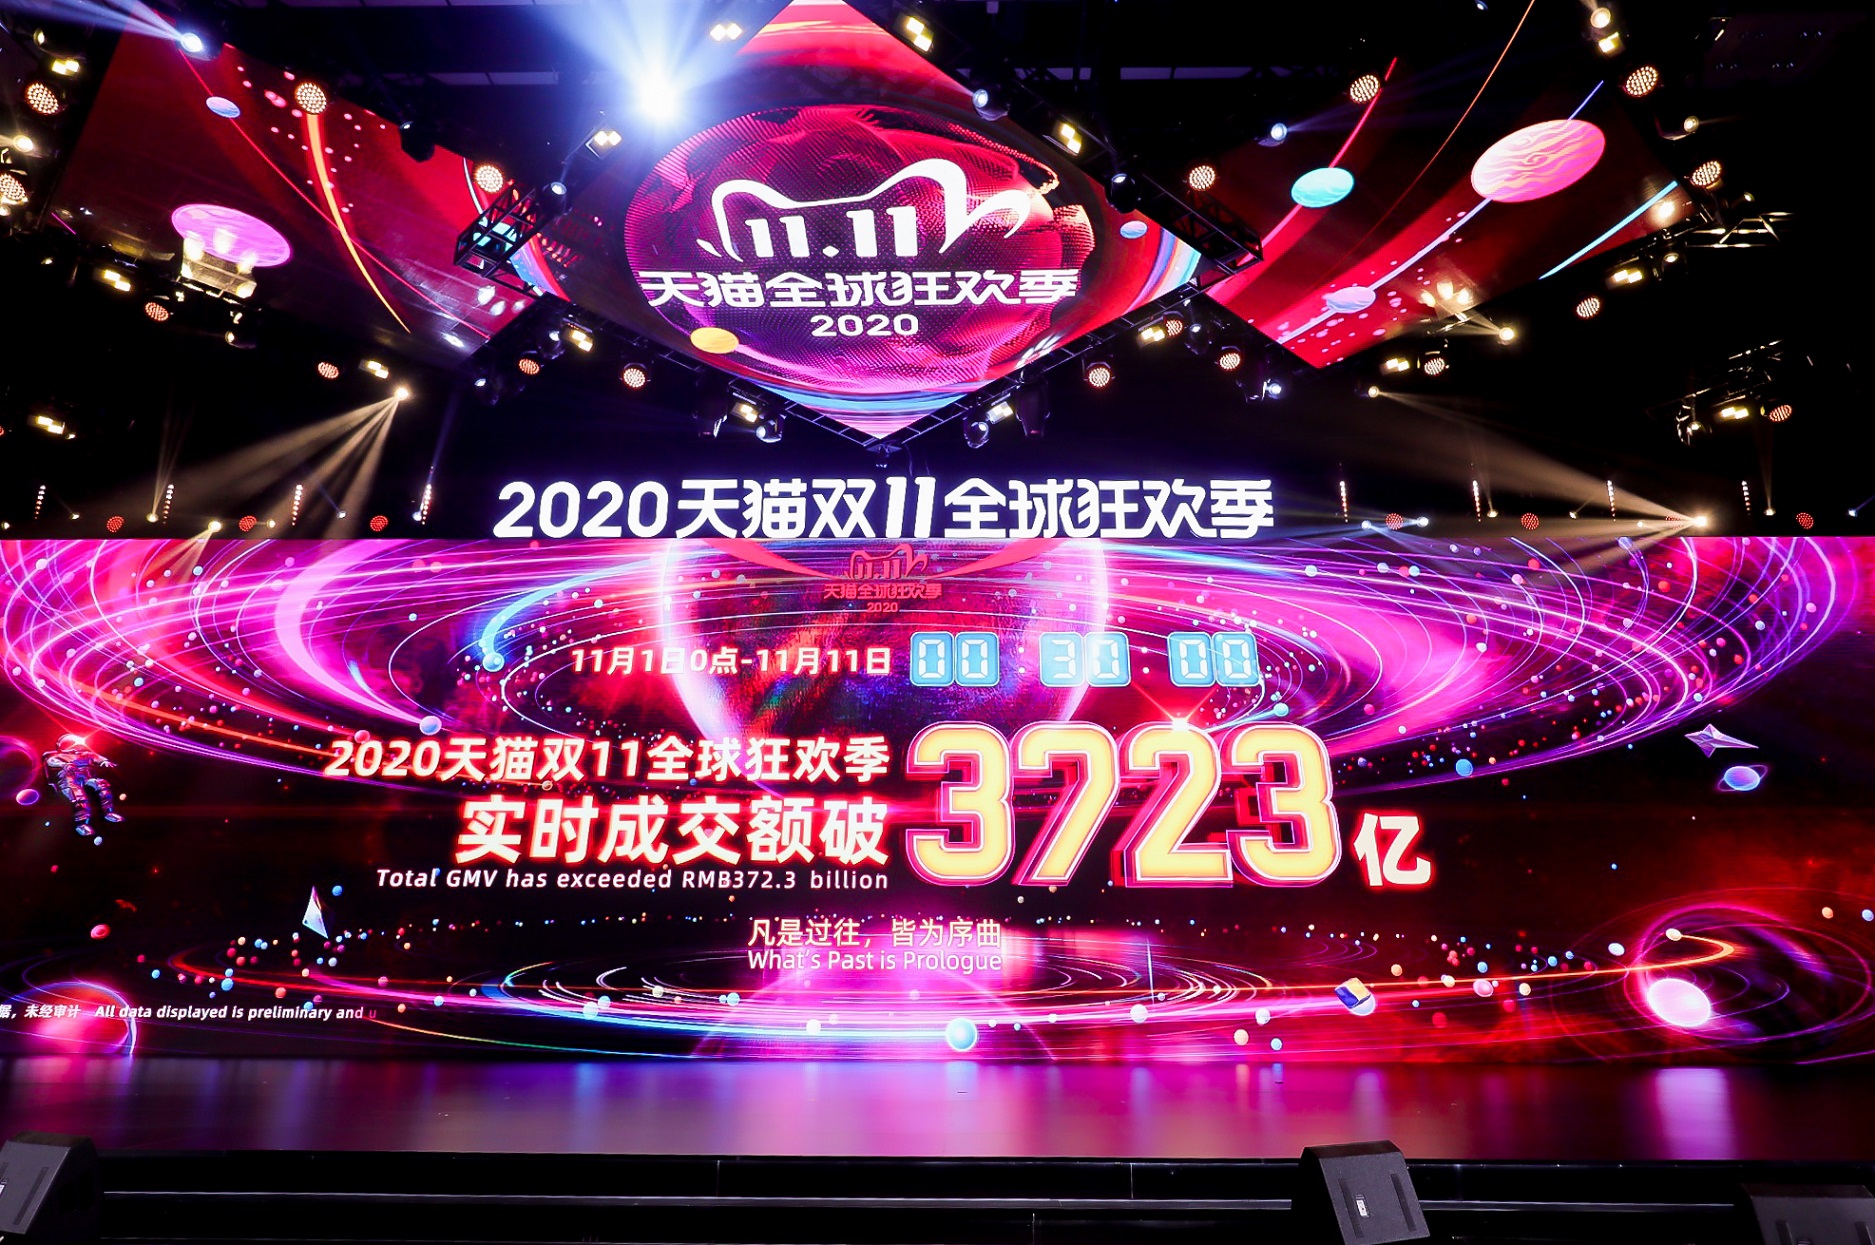 Alibaba 2020 11.11 Global Shopping Festival GMV surpasses RMB350 billion Alibaba digital infrastructure supports strong sales rebound for merchants